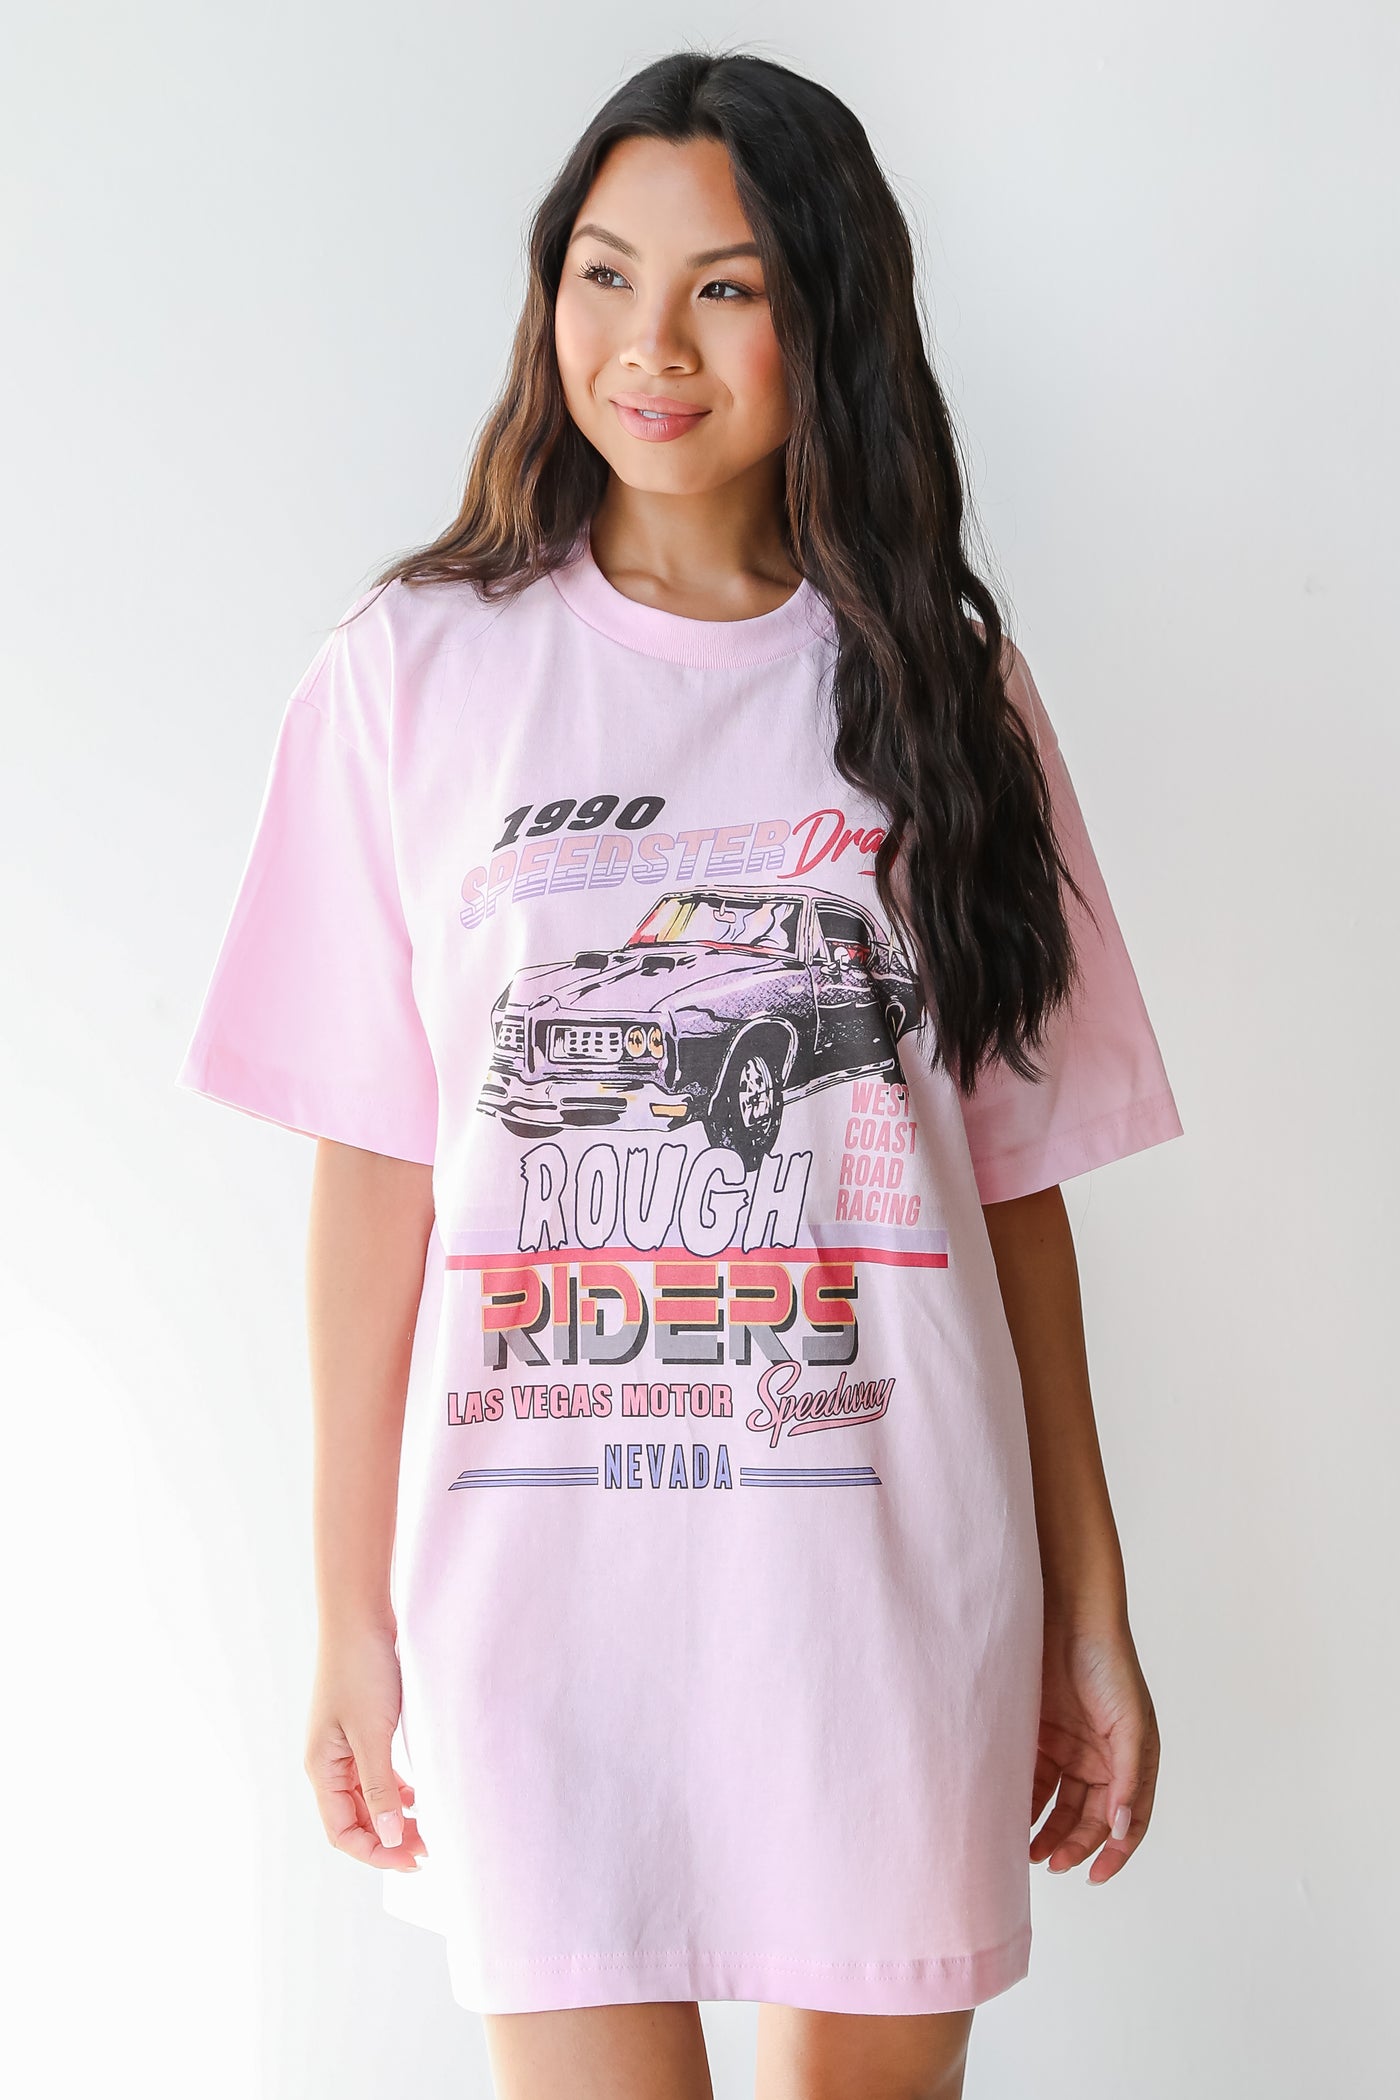 Rough Riders Vintage Graphic Tee on model